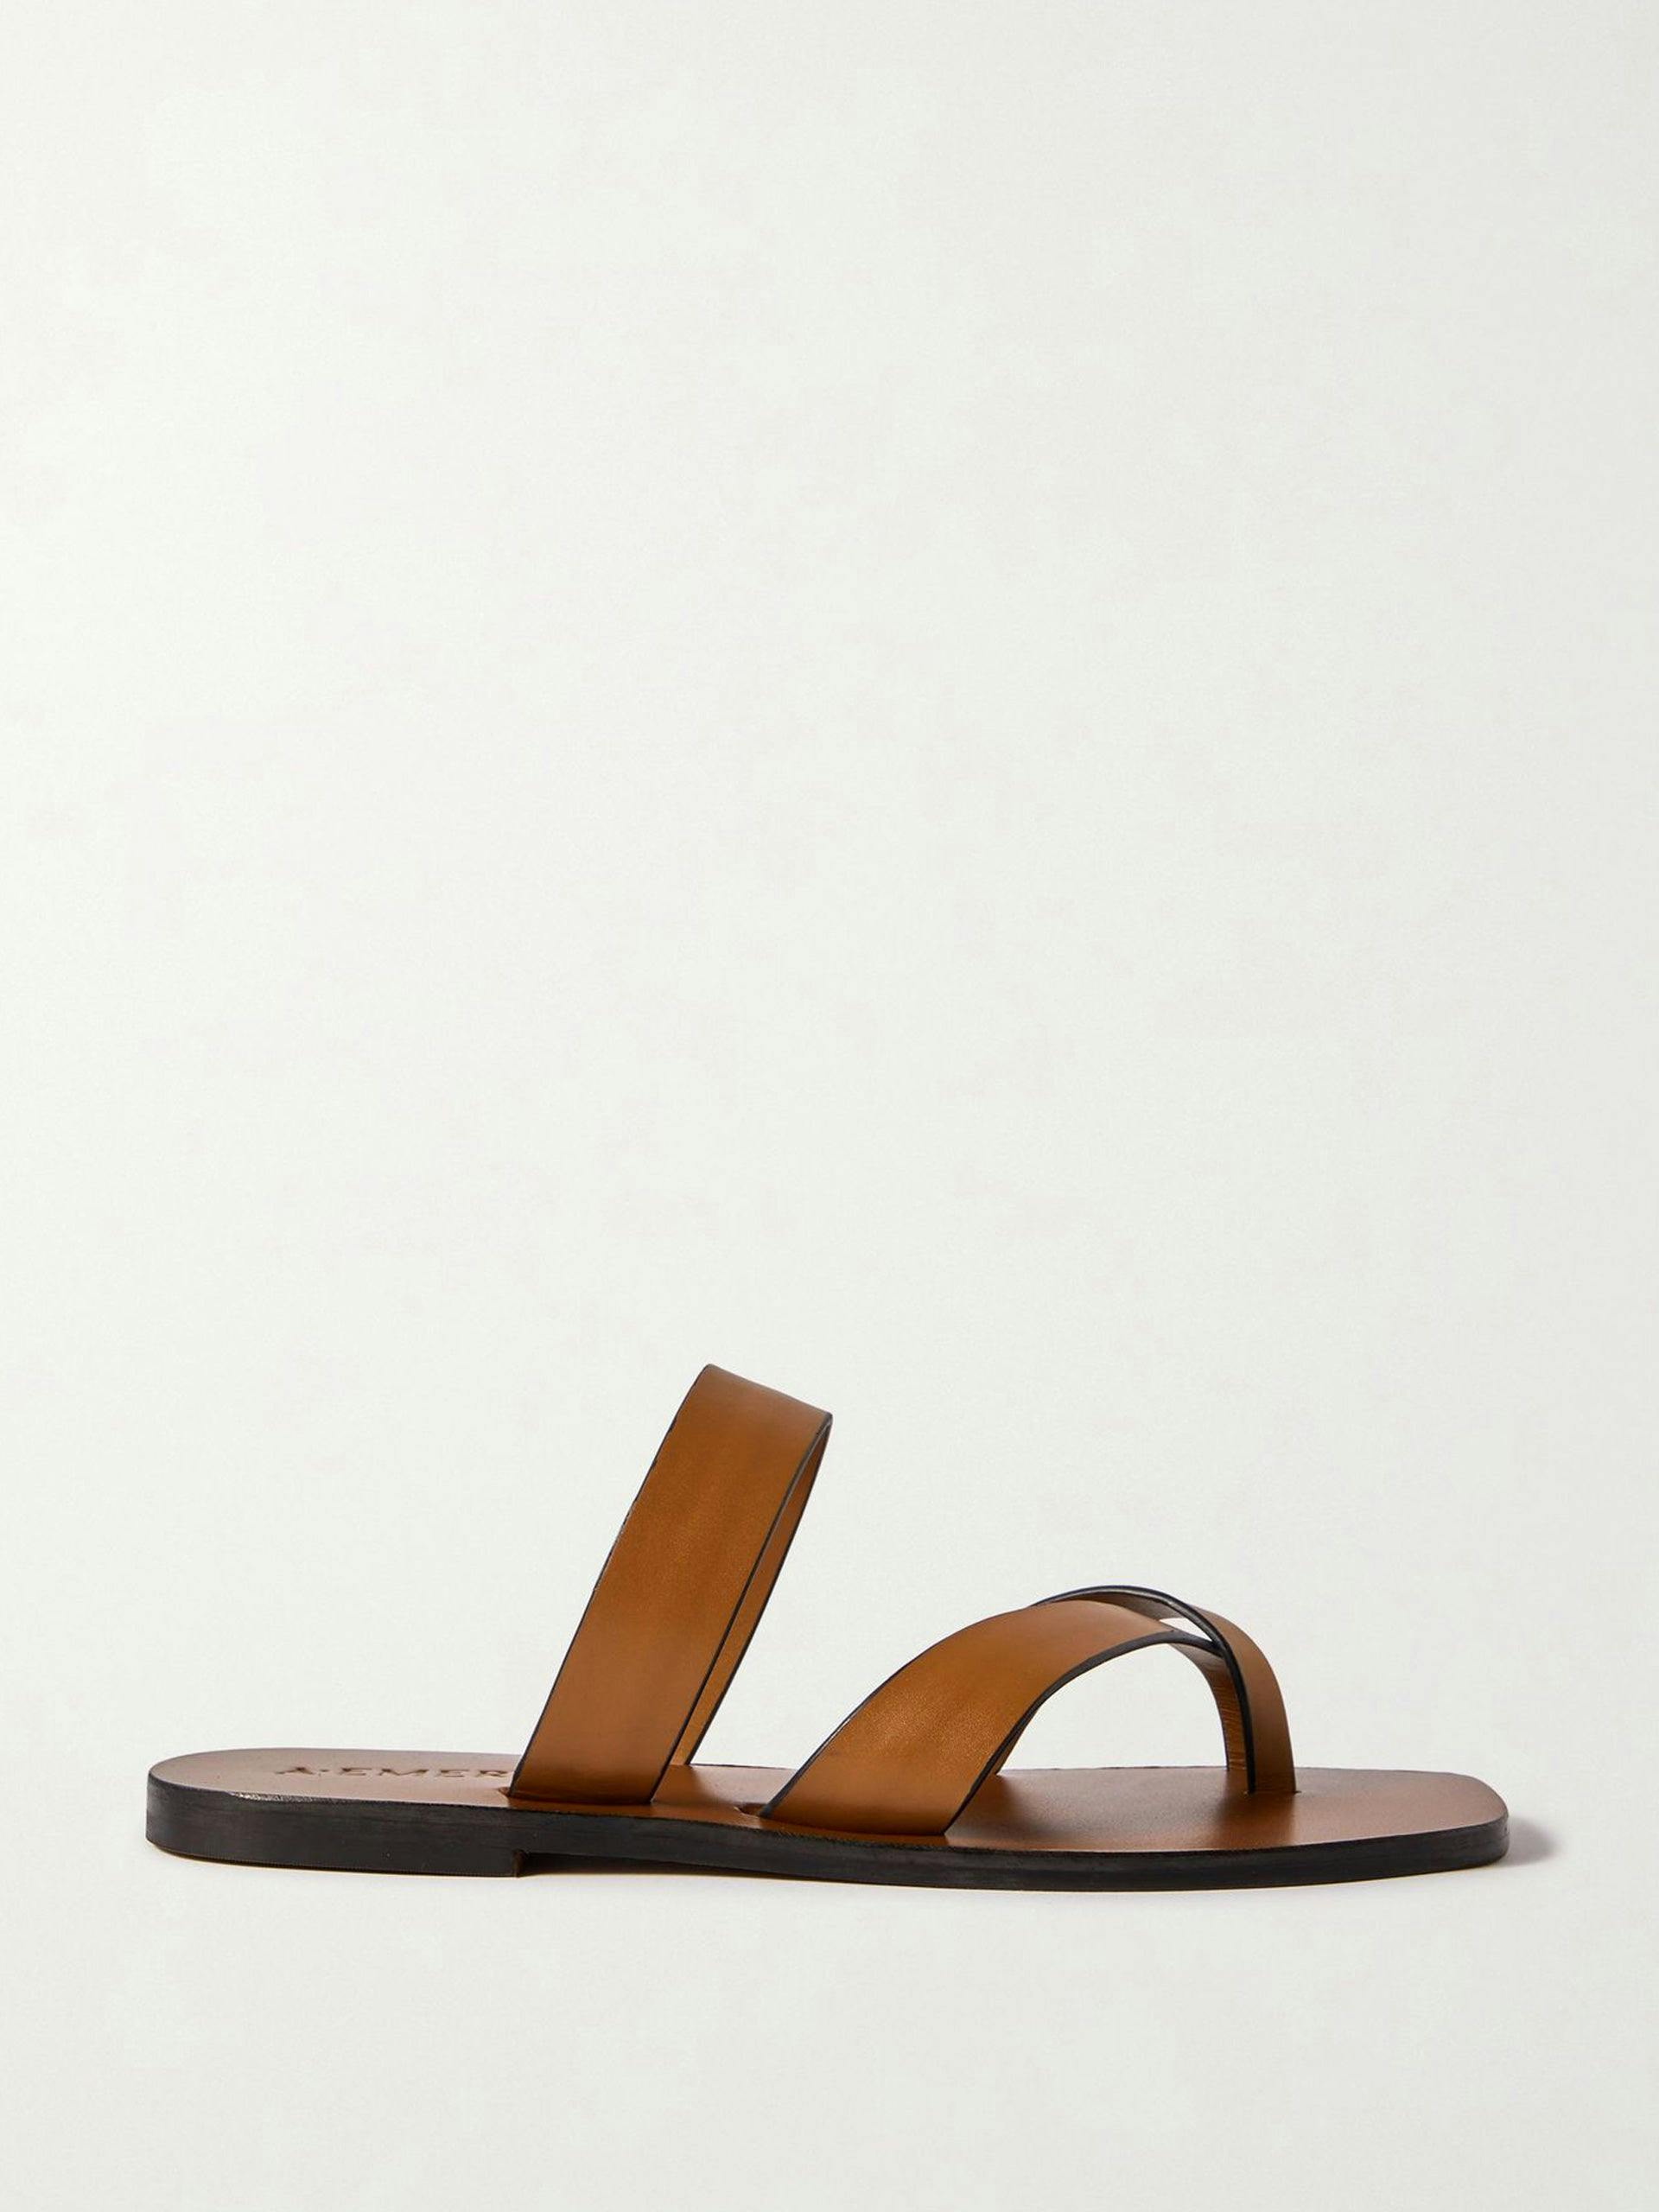 Carter leather sandals in tan